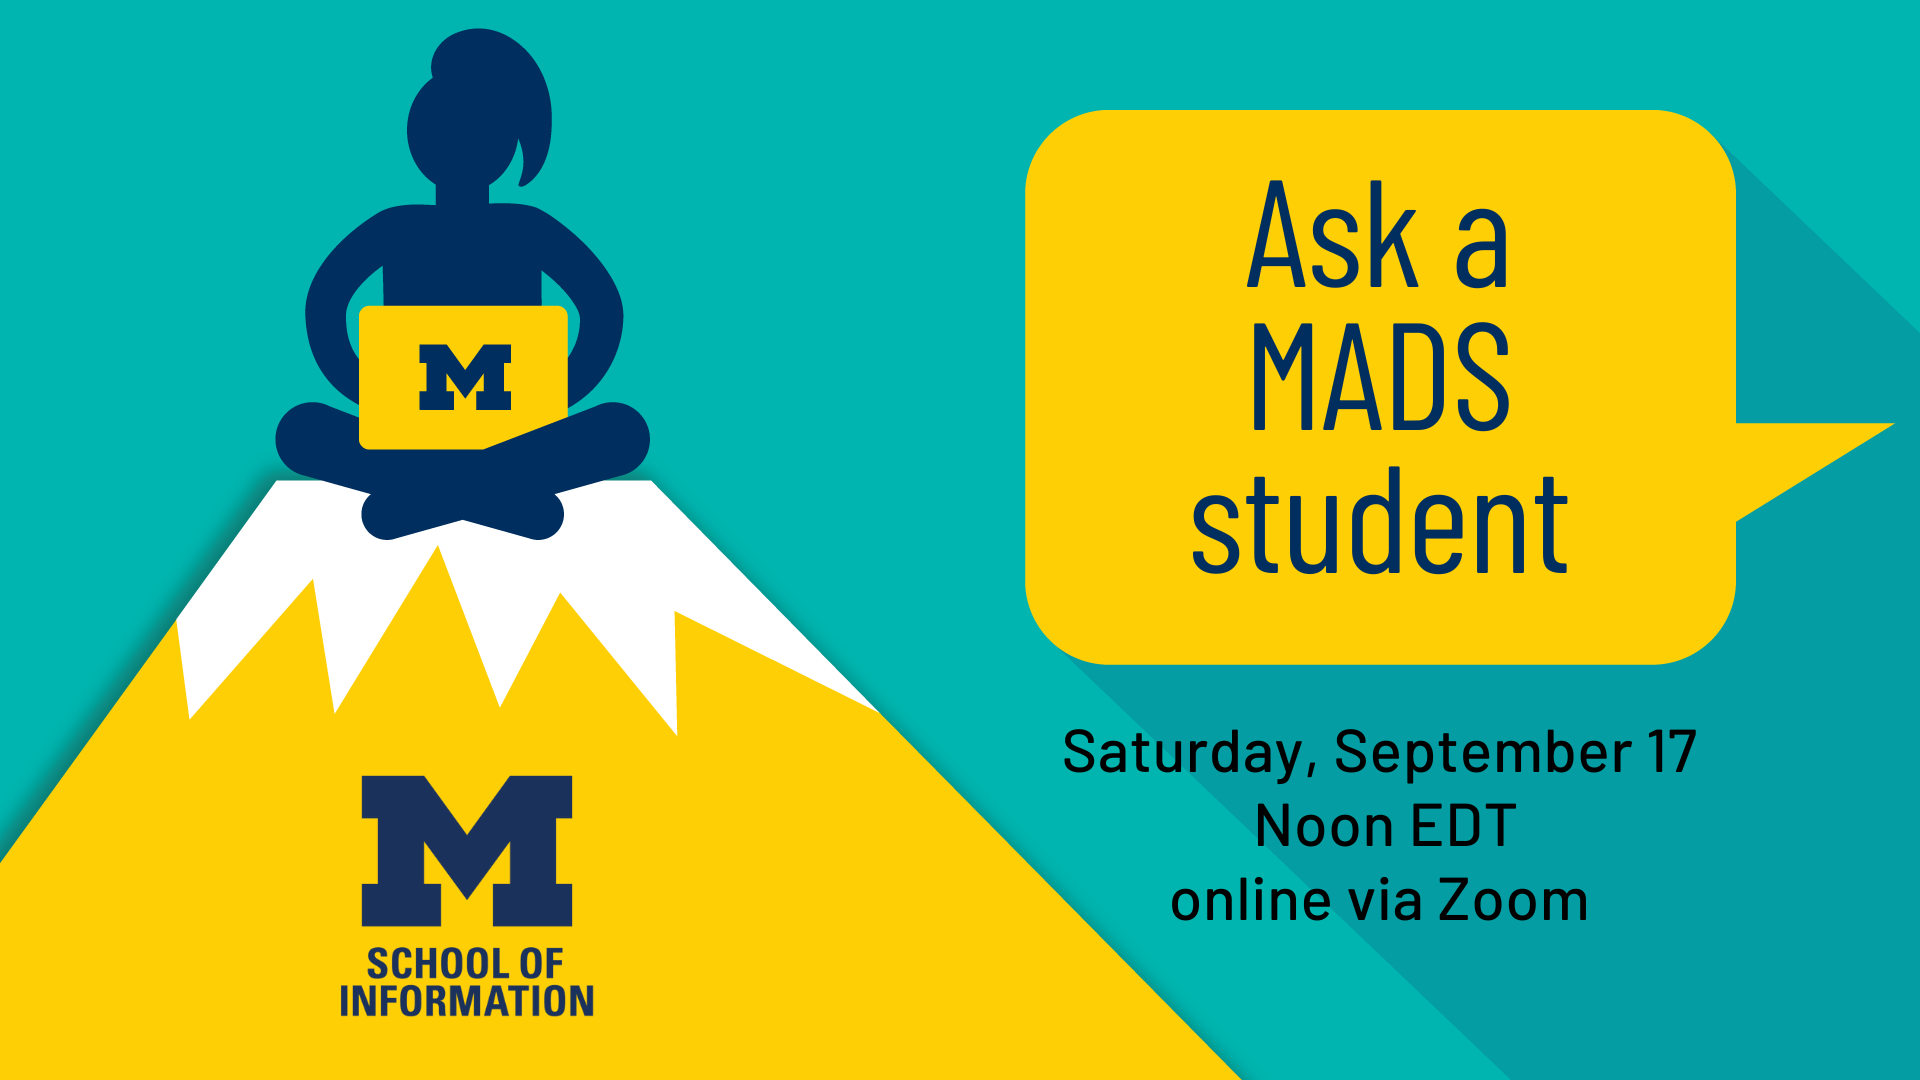 "Ask a MADS student. Saturday, September 17. Noon EDT. online via Zoom."